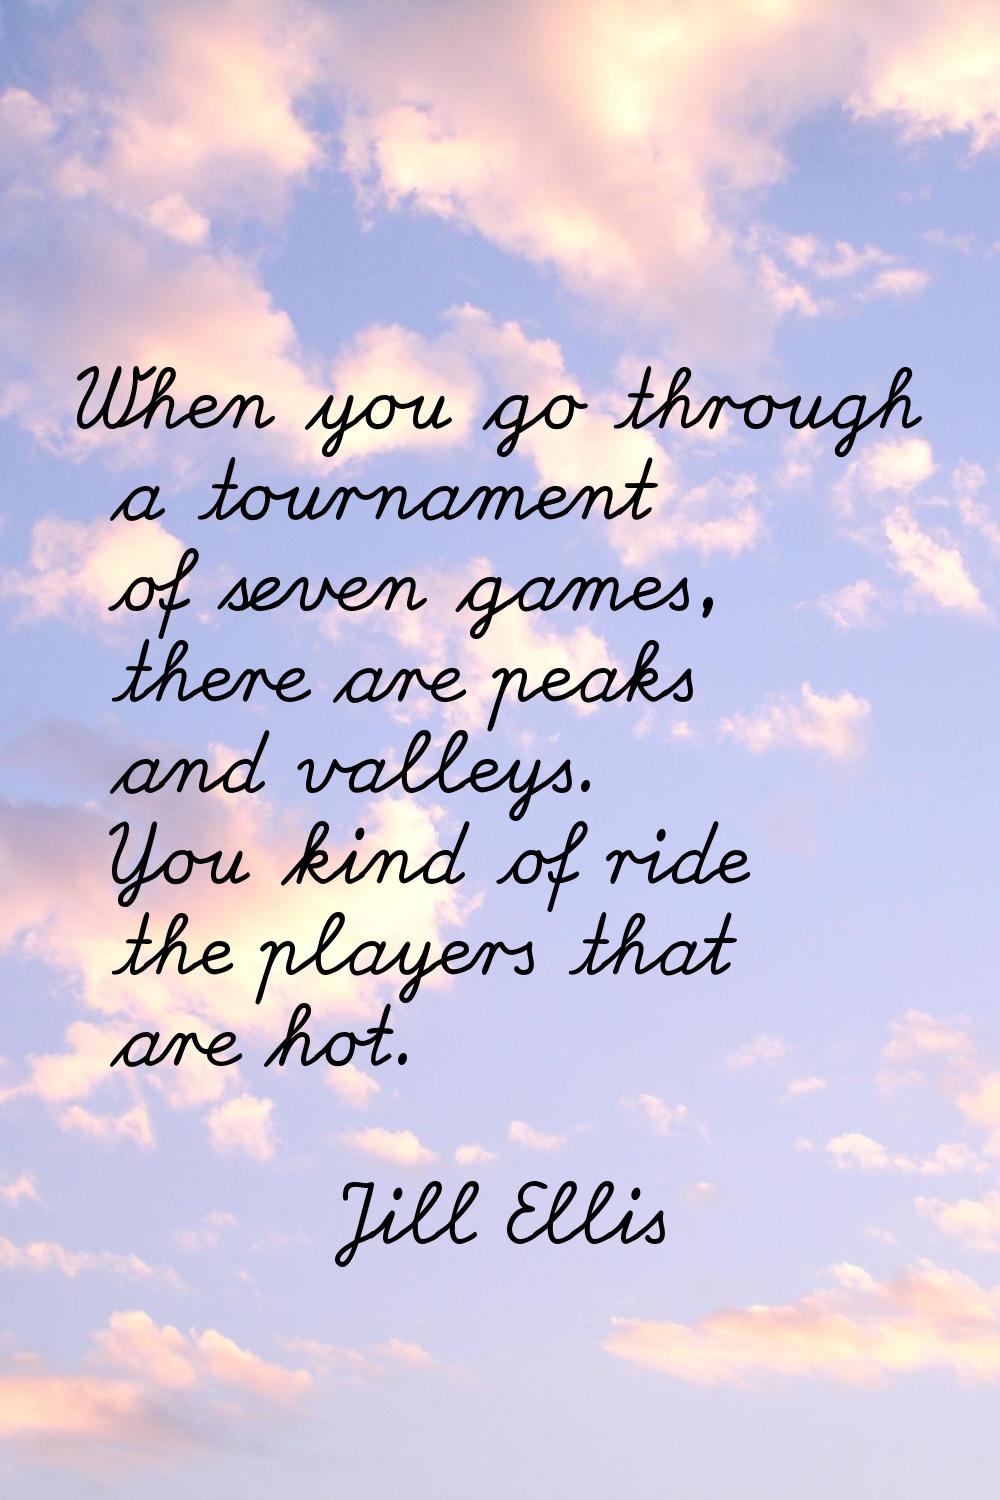 When you go through a tournament of seven games, there are peaks and valleys. You kind of ride the 